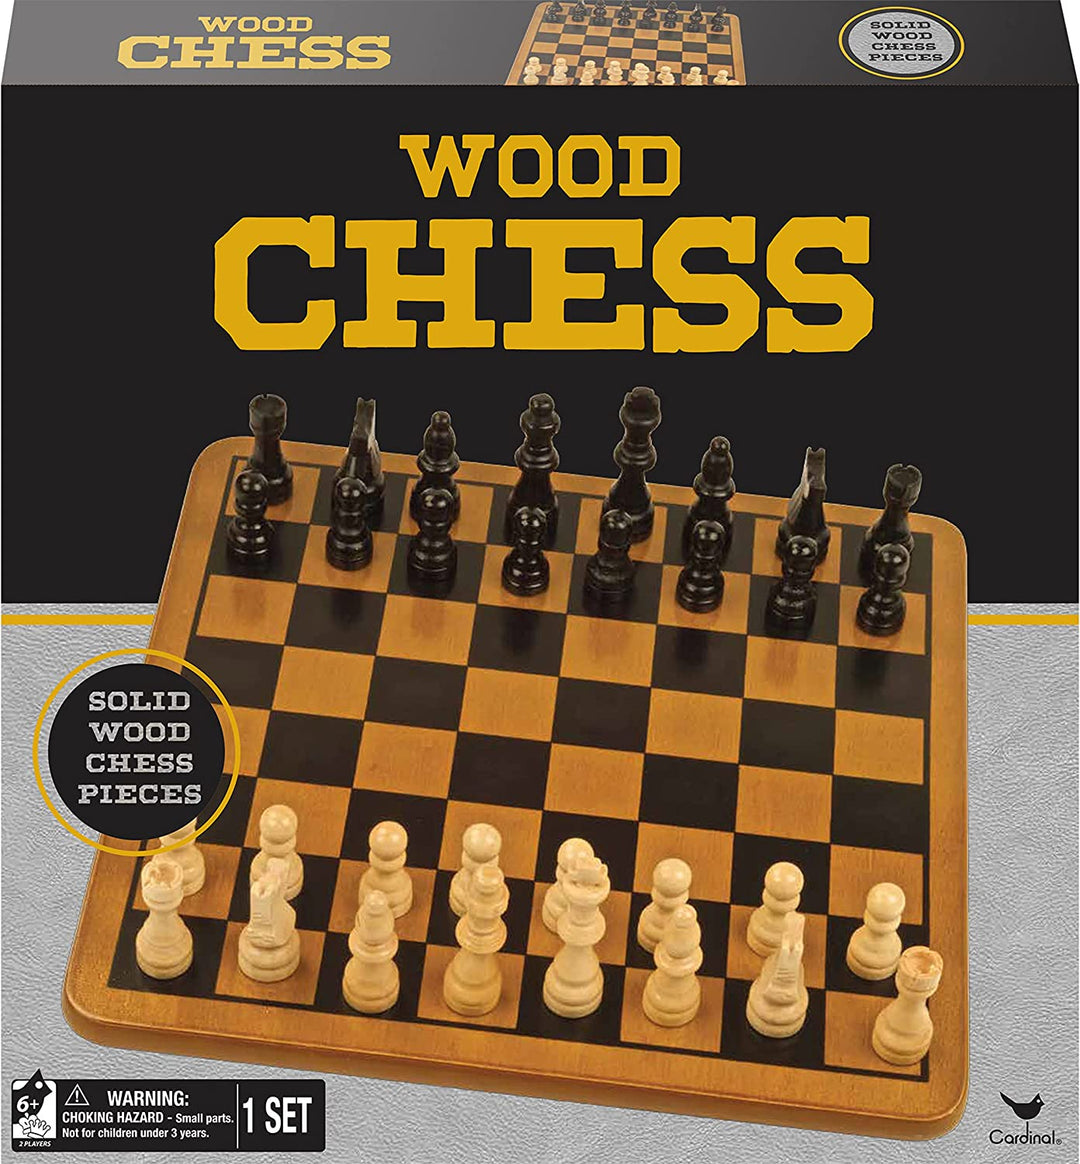 Classic Wooden Chess for Adults and Children aged 6+